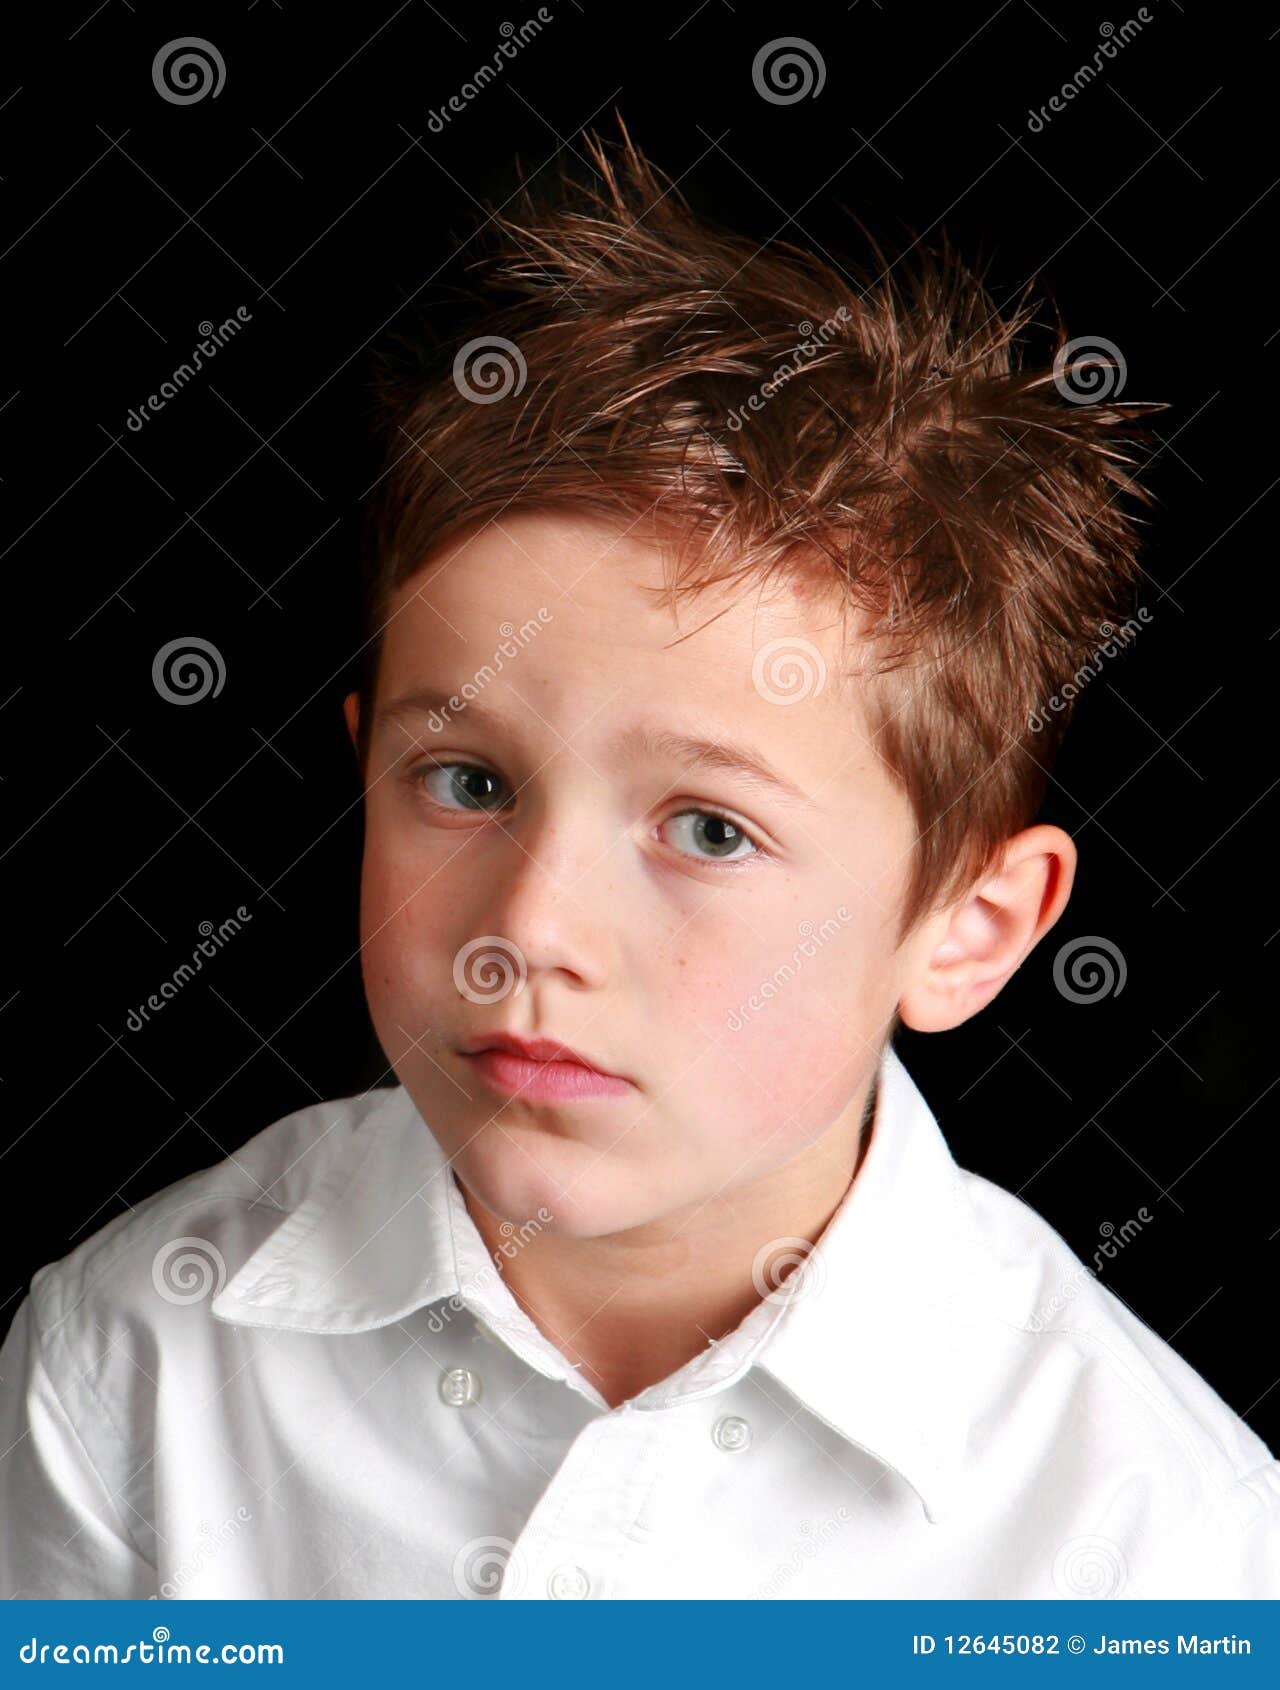 little boy with a forlorn expression